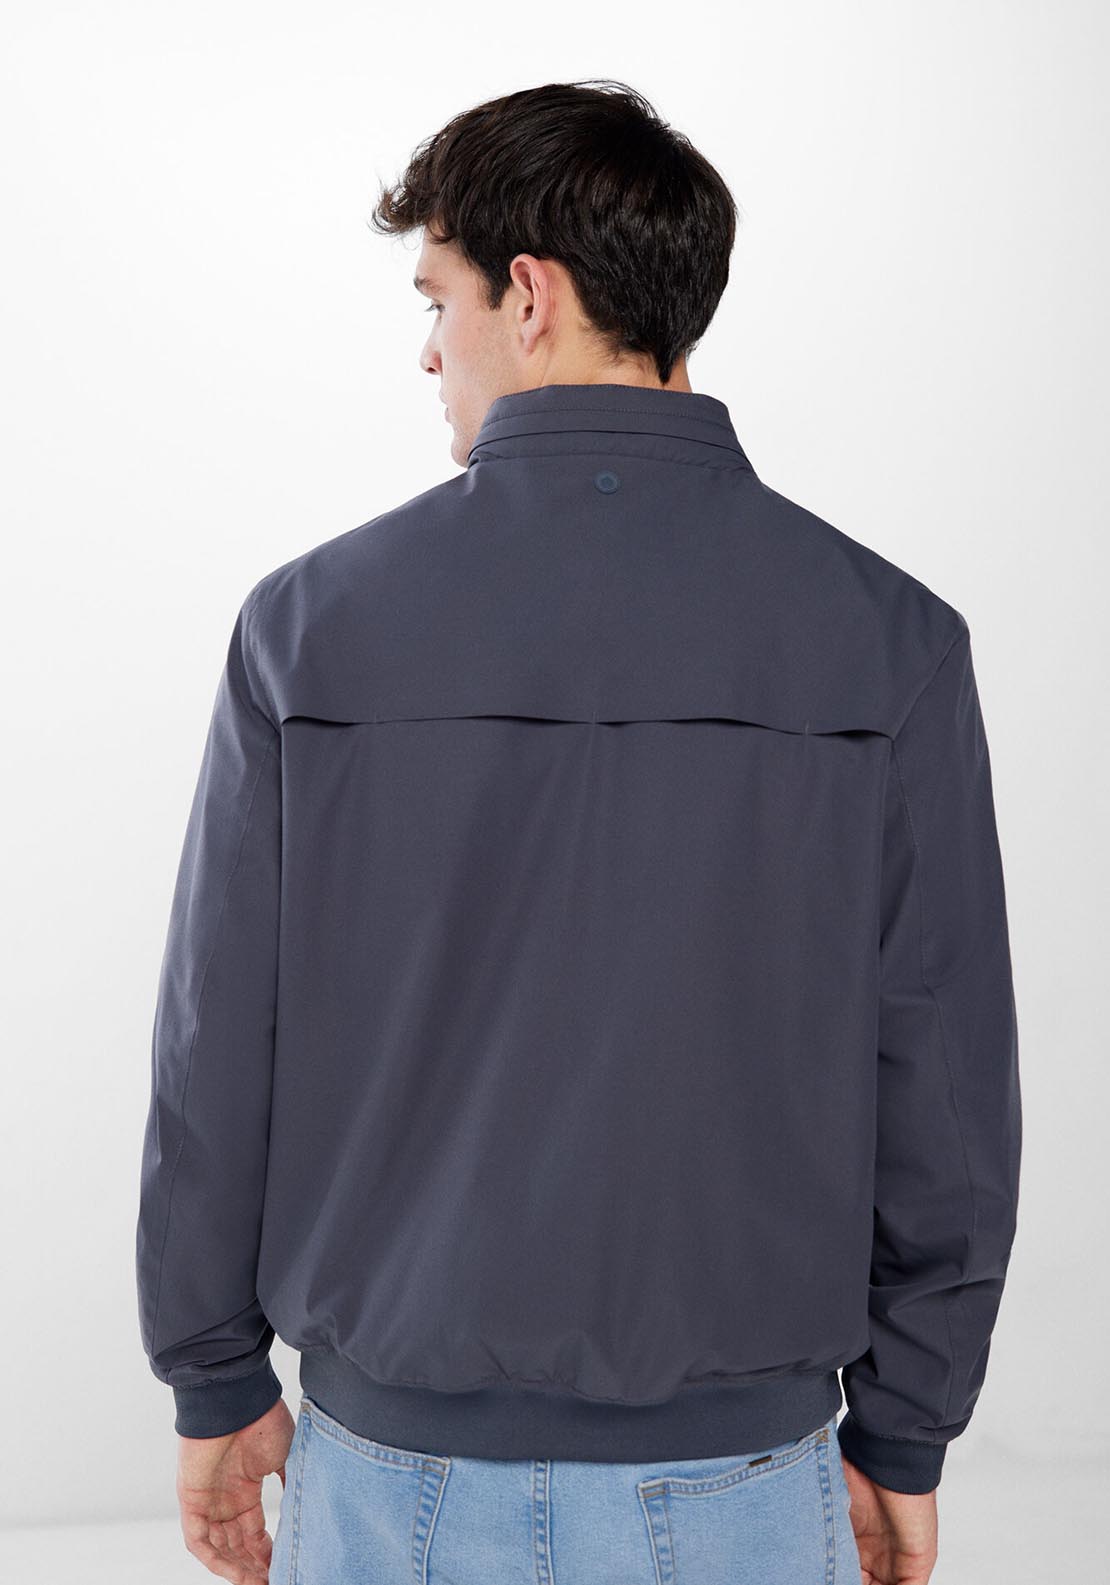 Springfield Technical jacket - Blue 4 Shaws Department Stores